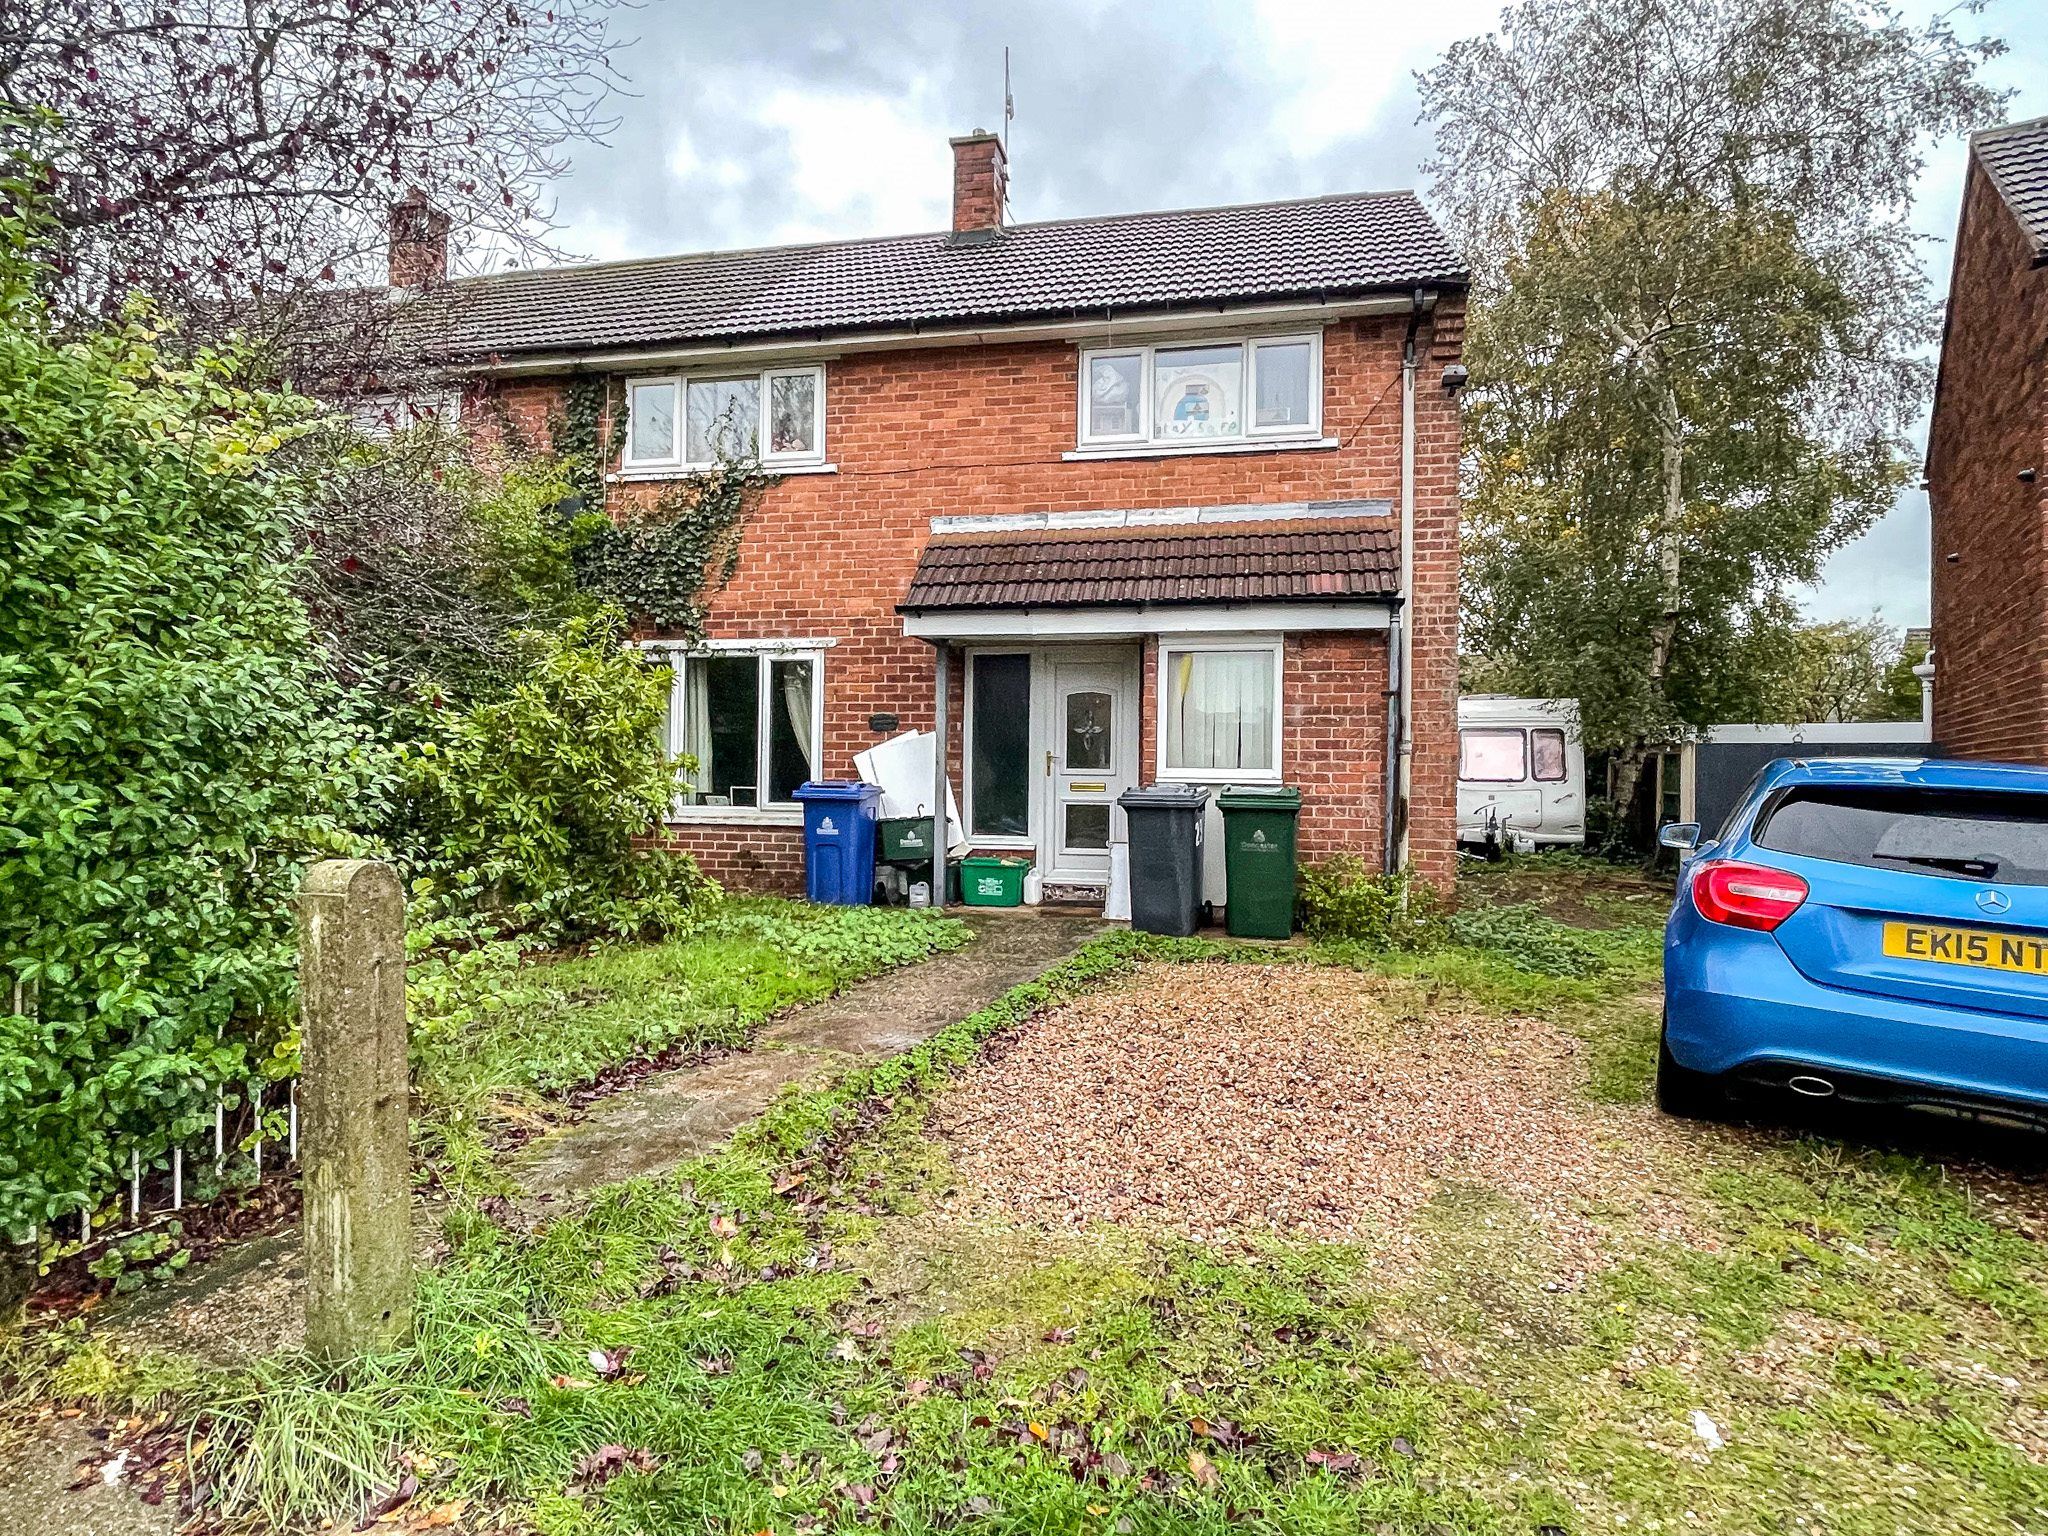 Birch Road, Cantley, Doncaster, DN4 6PD